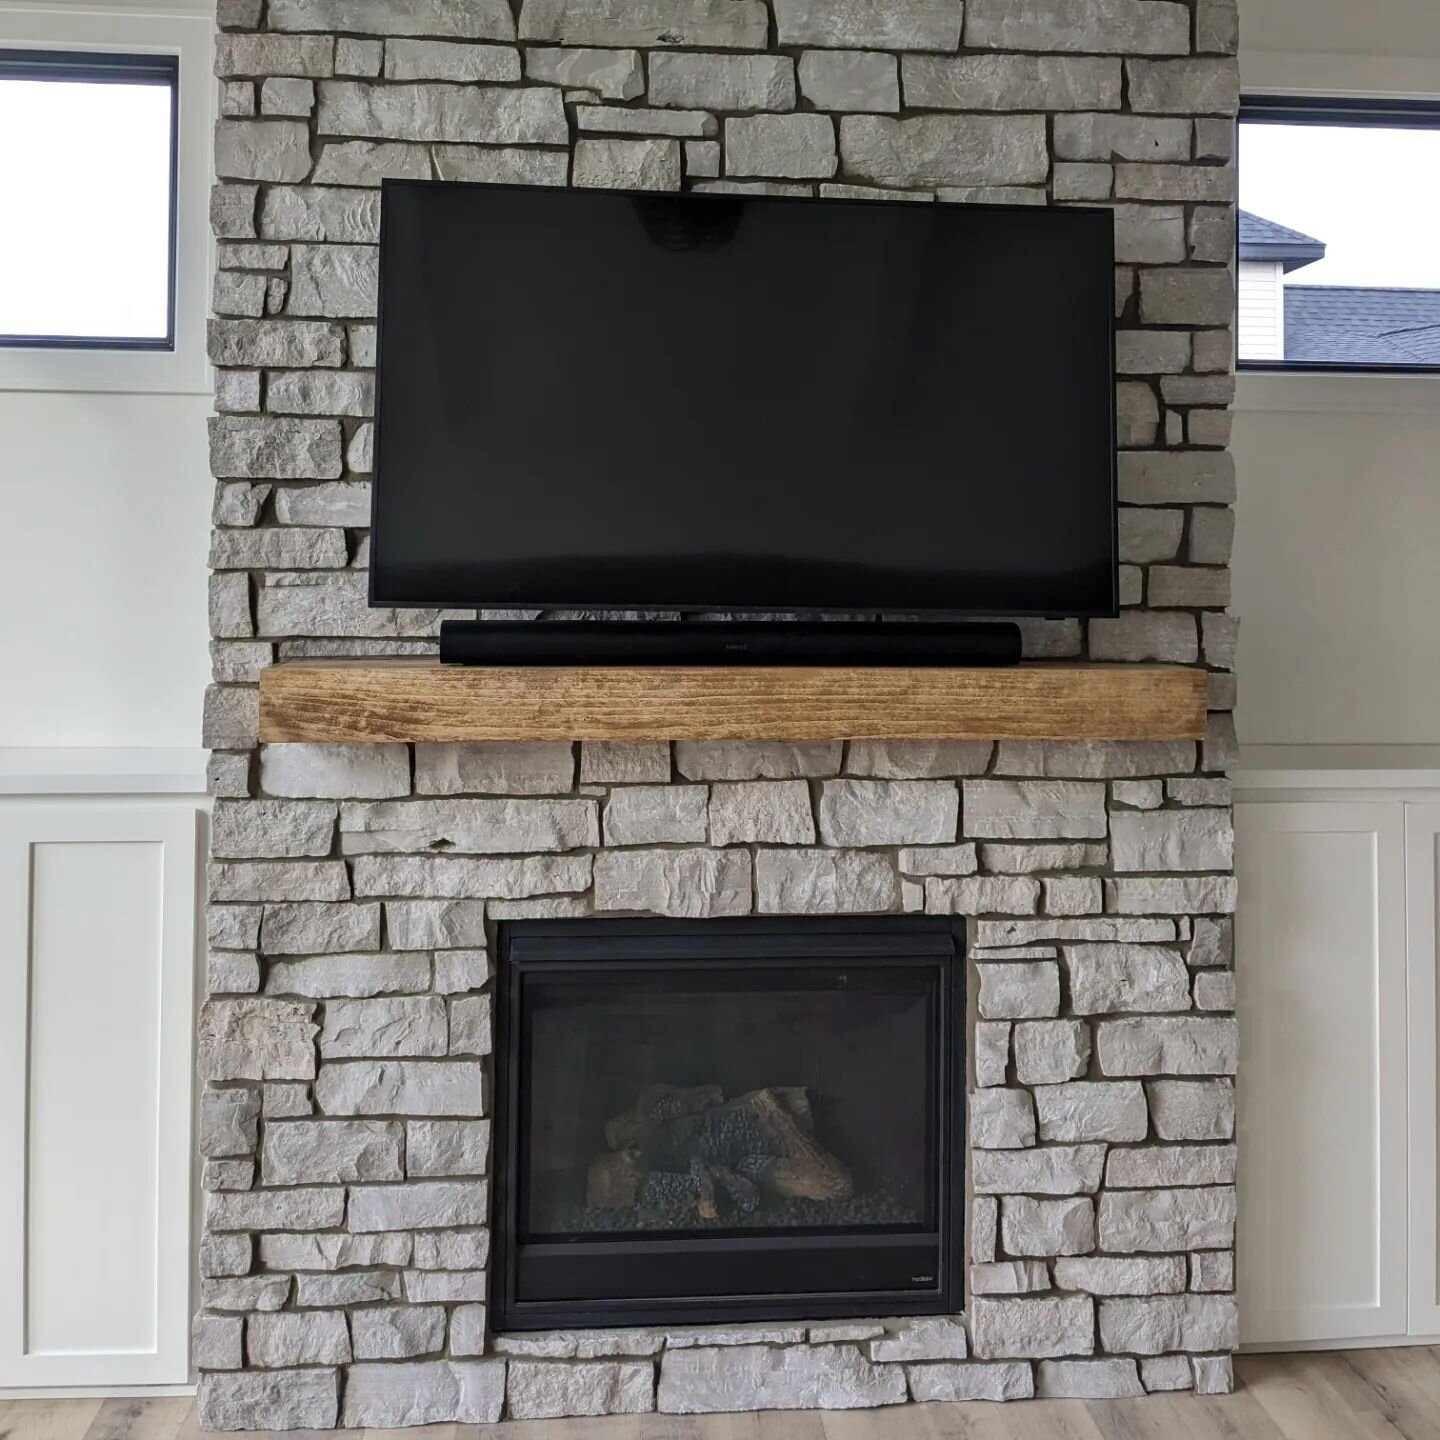 We just finished this ceiling high fireplace 🔥 the stone we used was real limestone thin cut veneer and is another product we offer 🪨 it's a unique because it has crystals forming in a few spots, it's really cool.